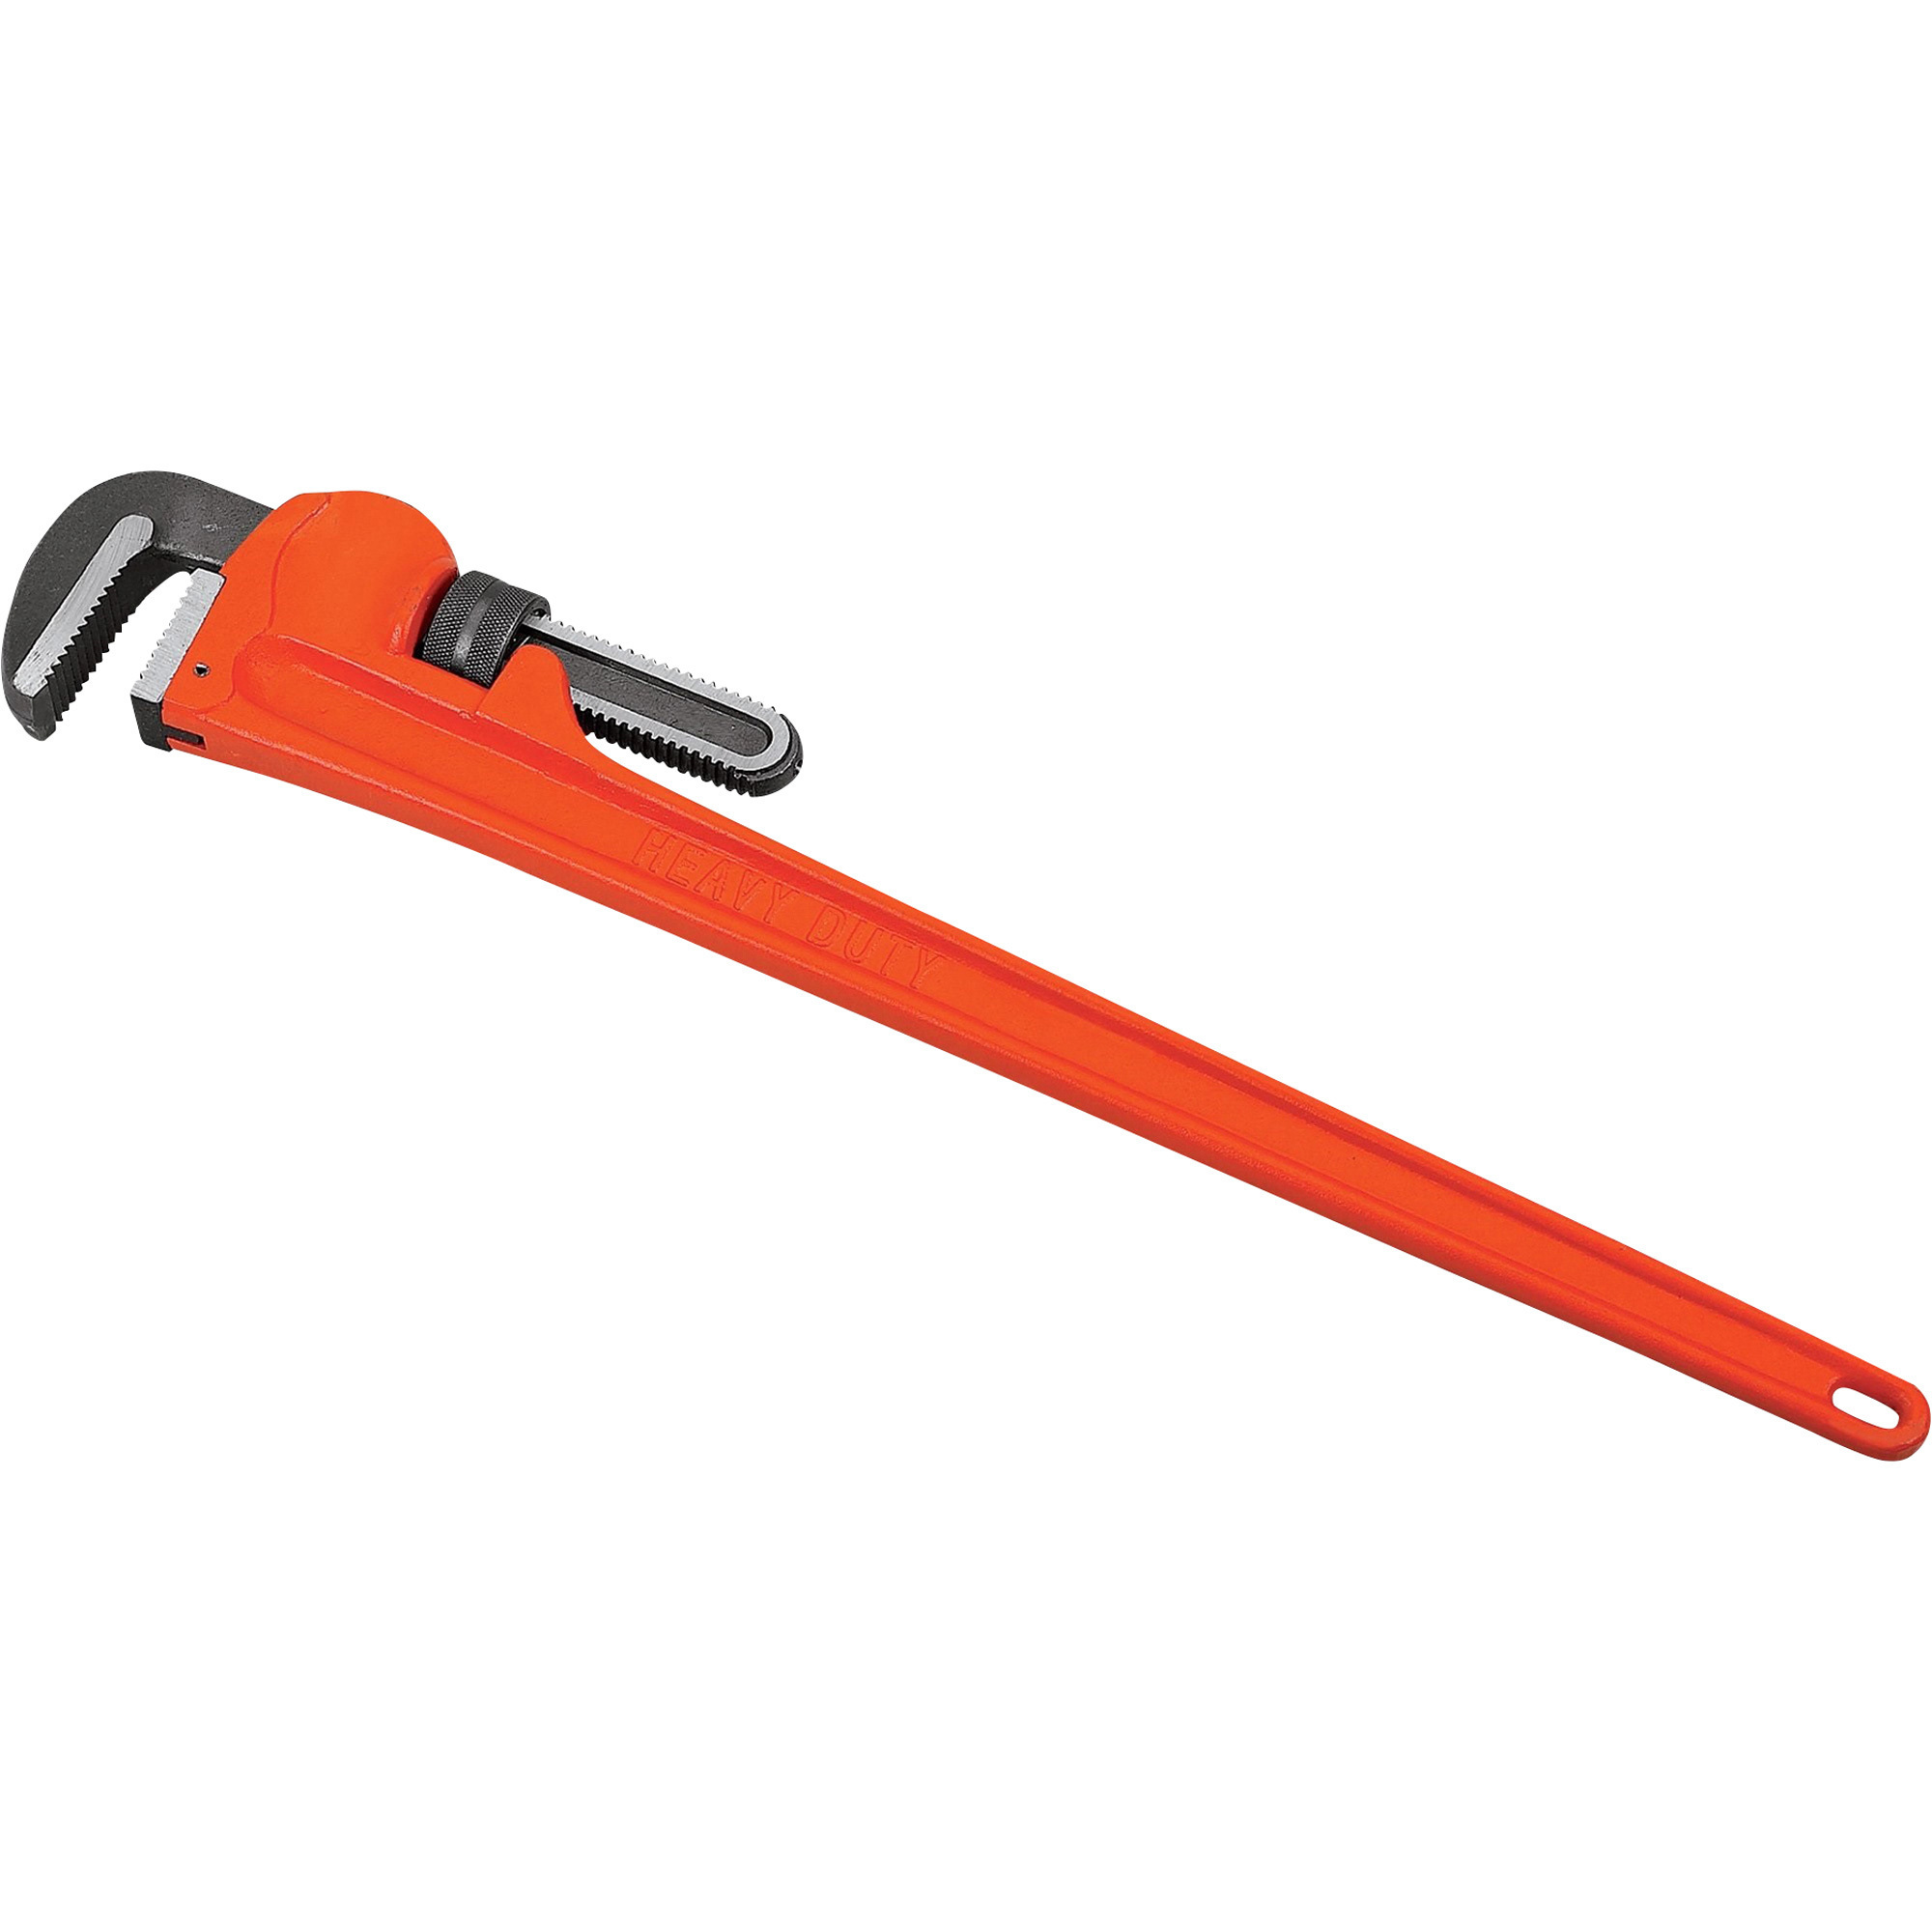 Klutch Pipe Wrench, 18Inch, Model 73280